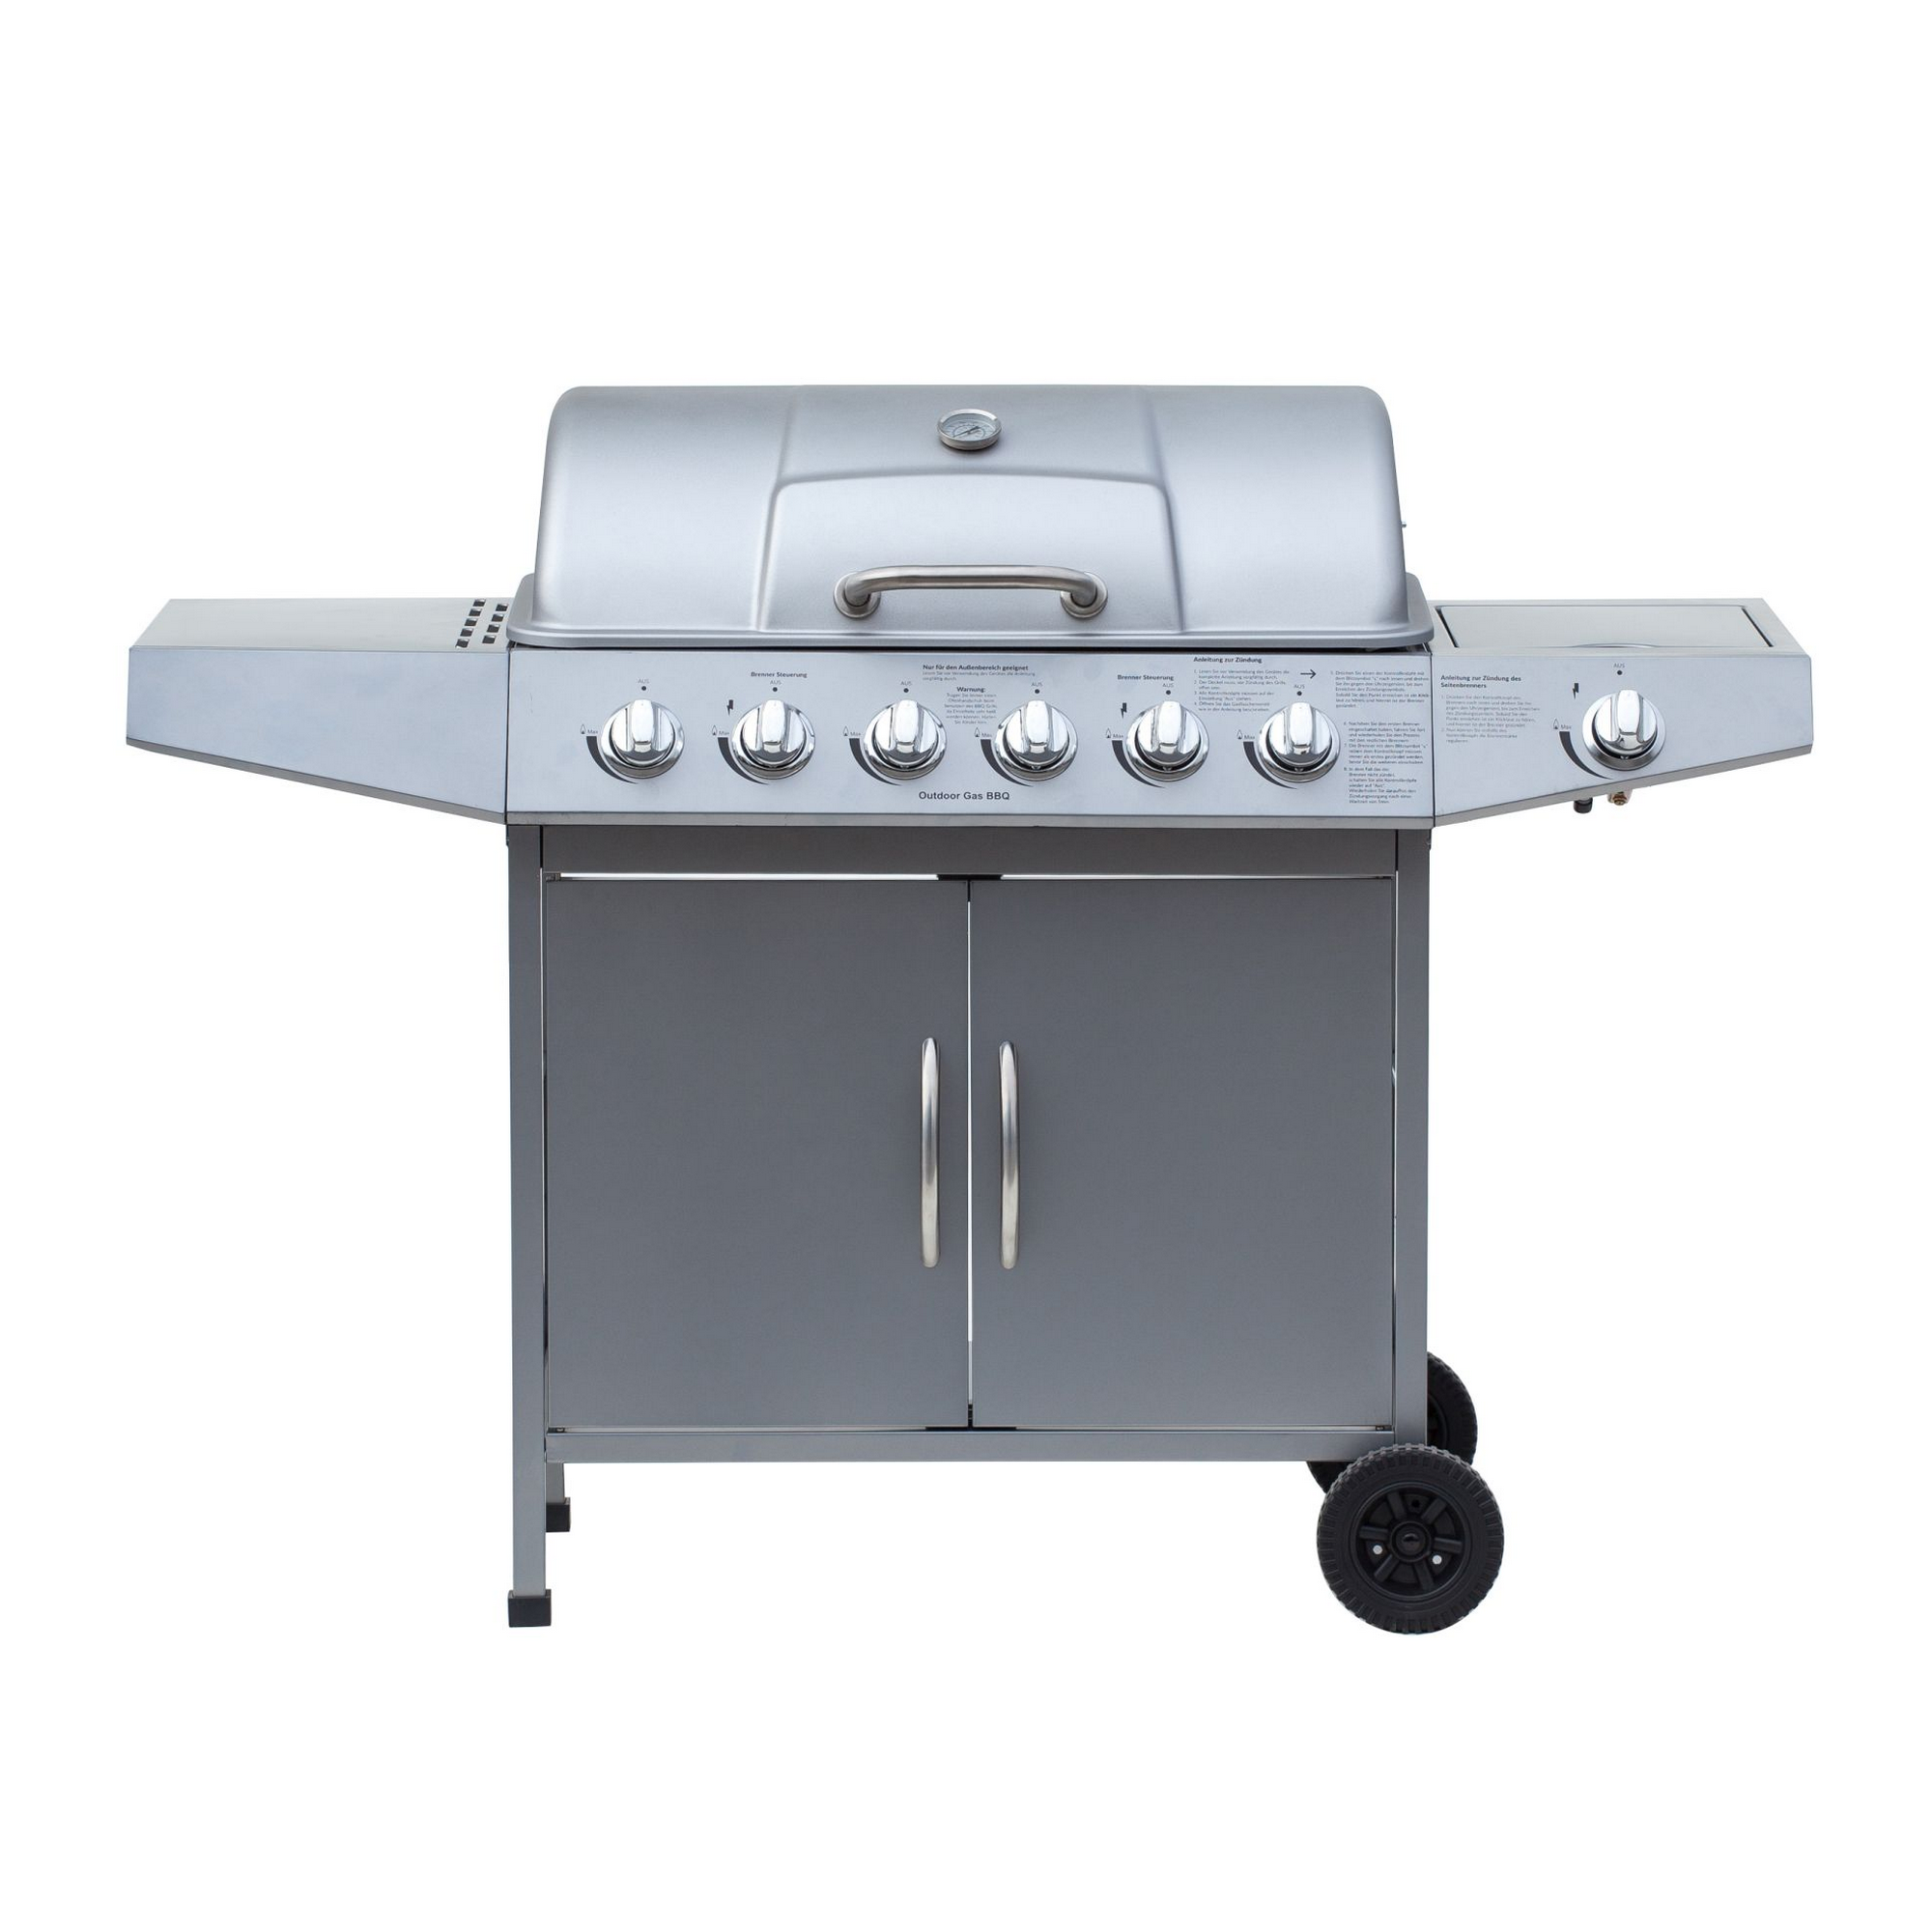 Gasgrill 'Dayton' silber 97 x 133 x 54 cm + product picture